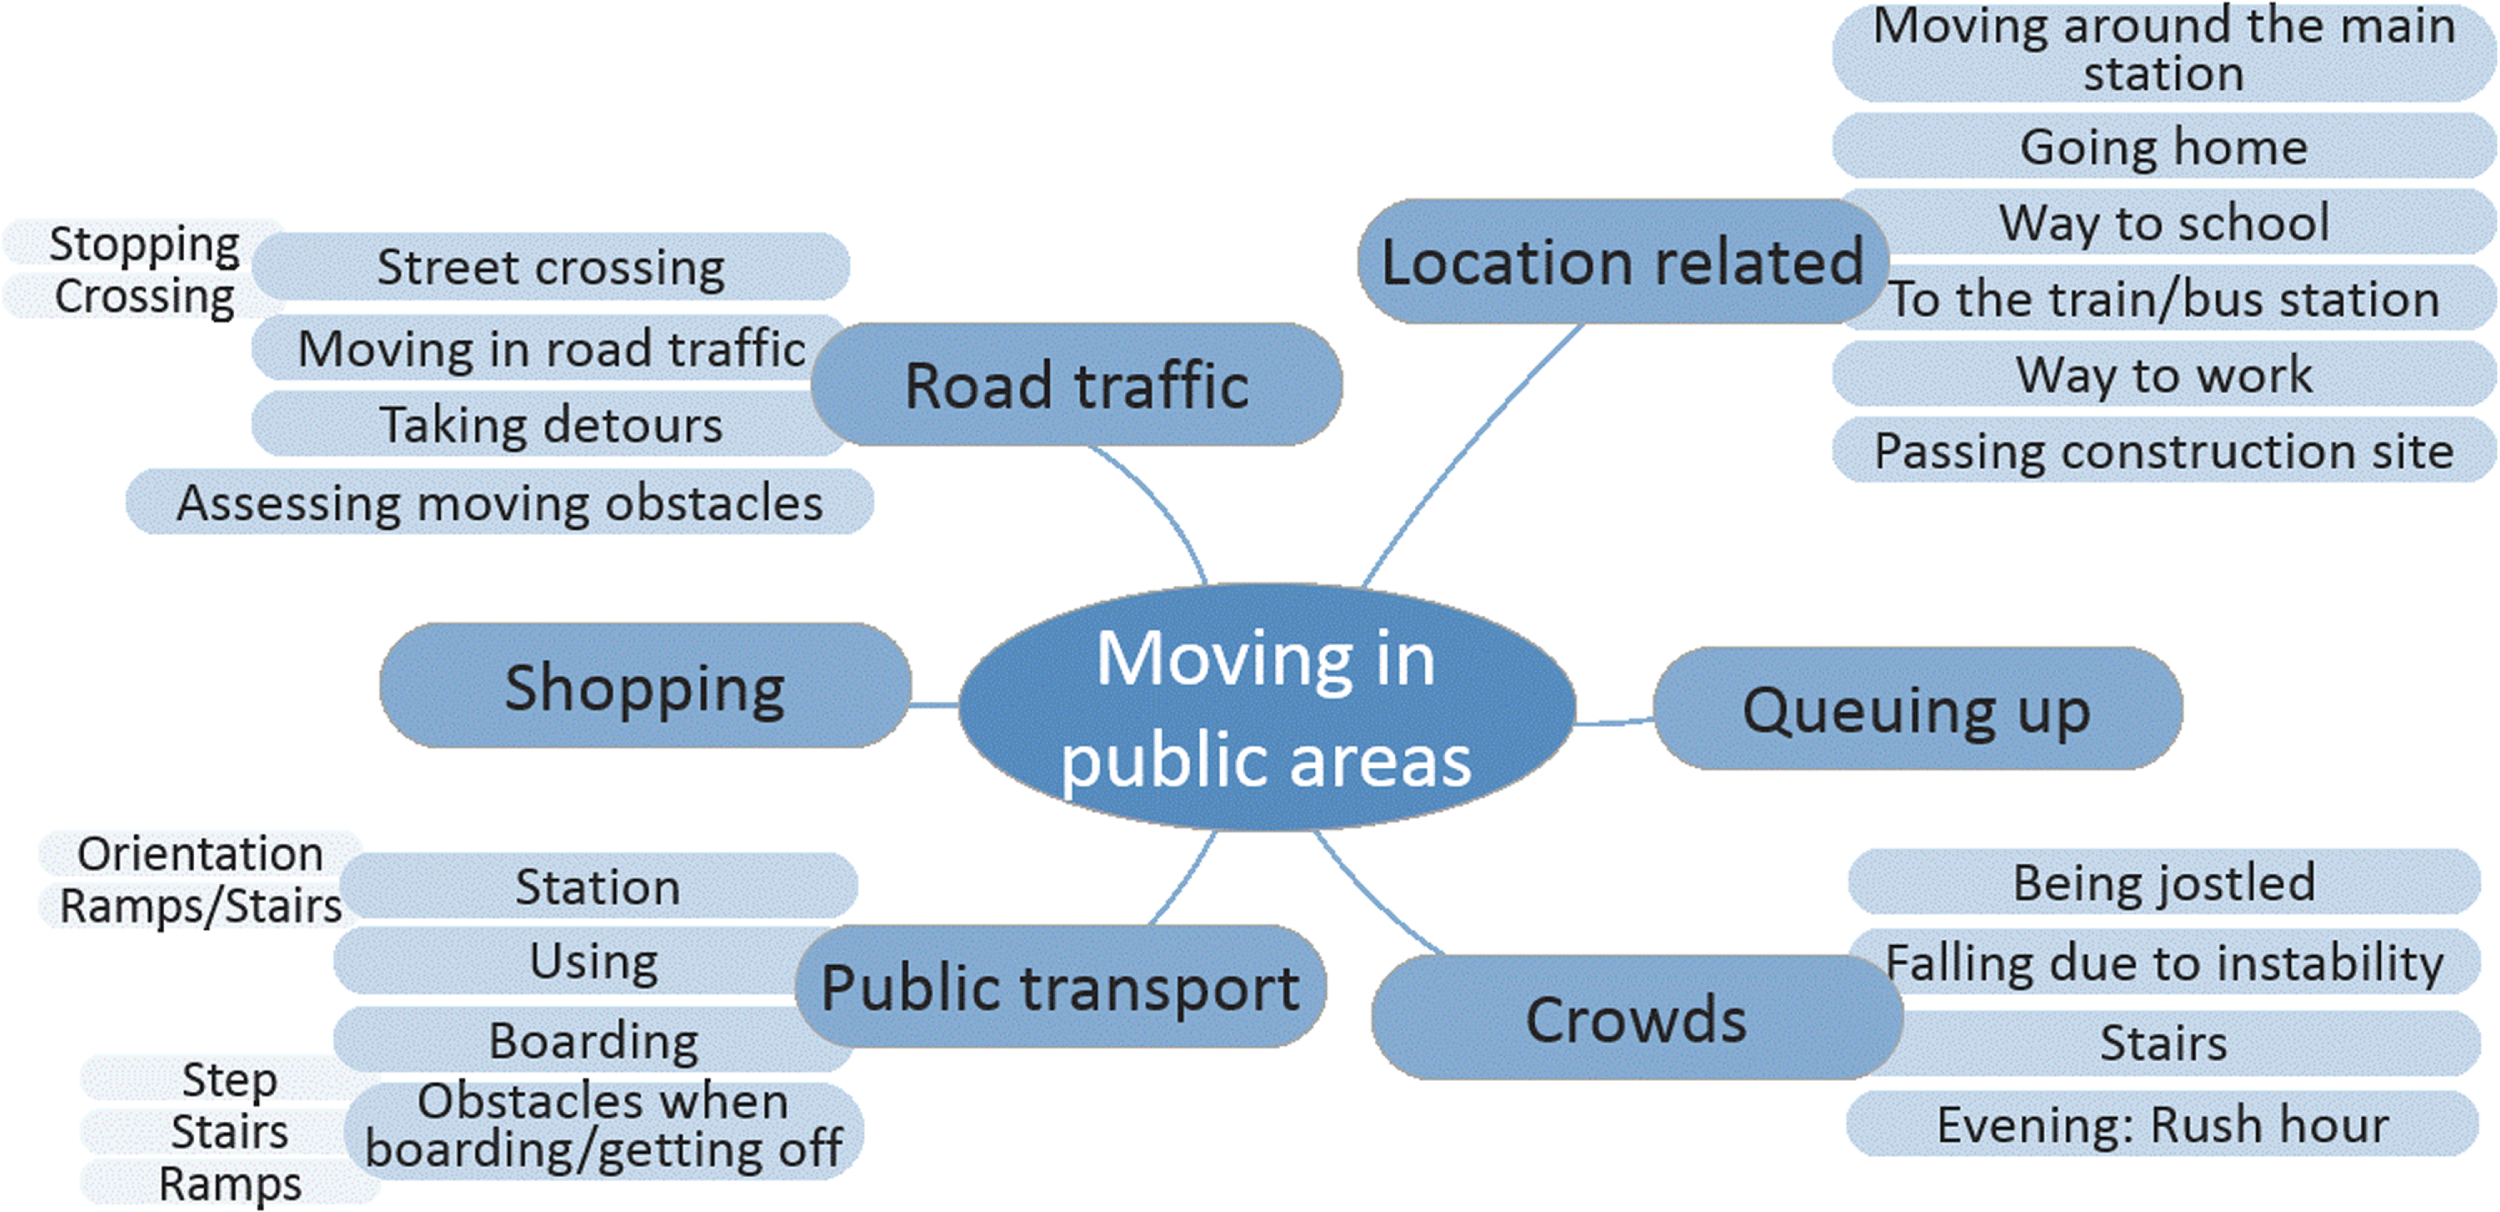 Mind-map of activities mentioned by the parents and adolescents related to moving in public areas.